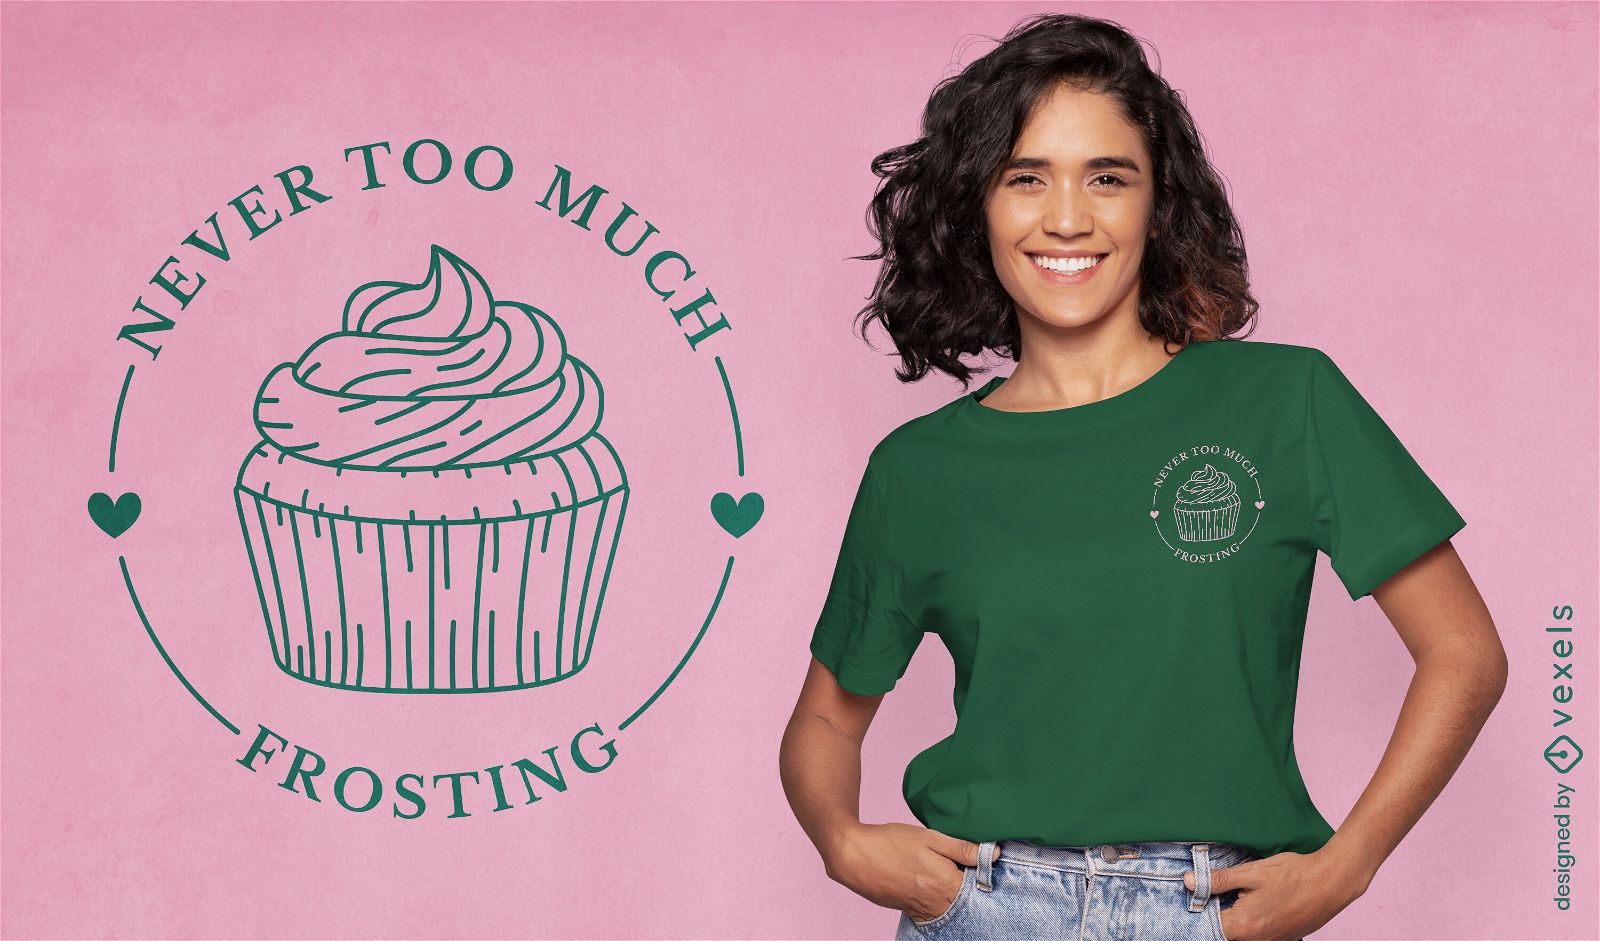 Cupcake and frosting quote t-shirt design